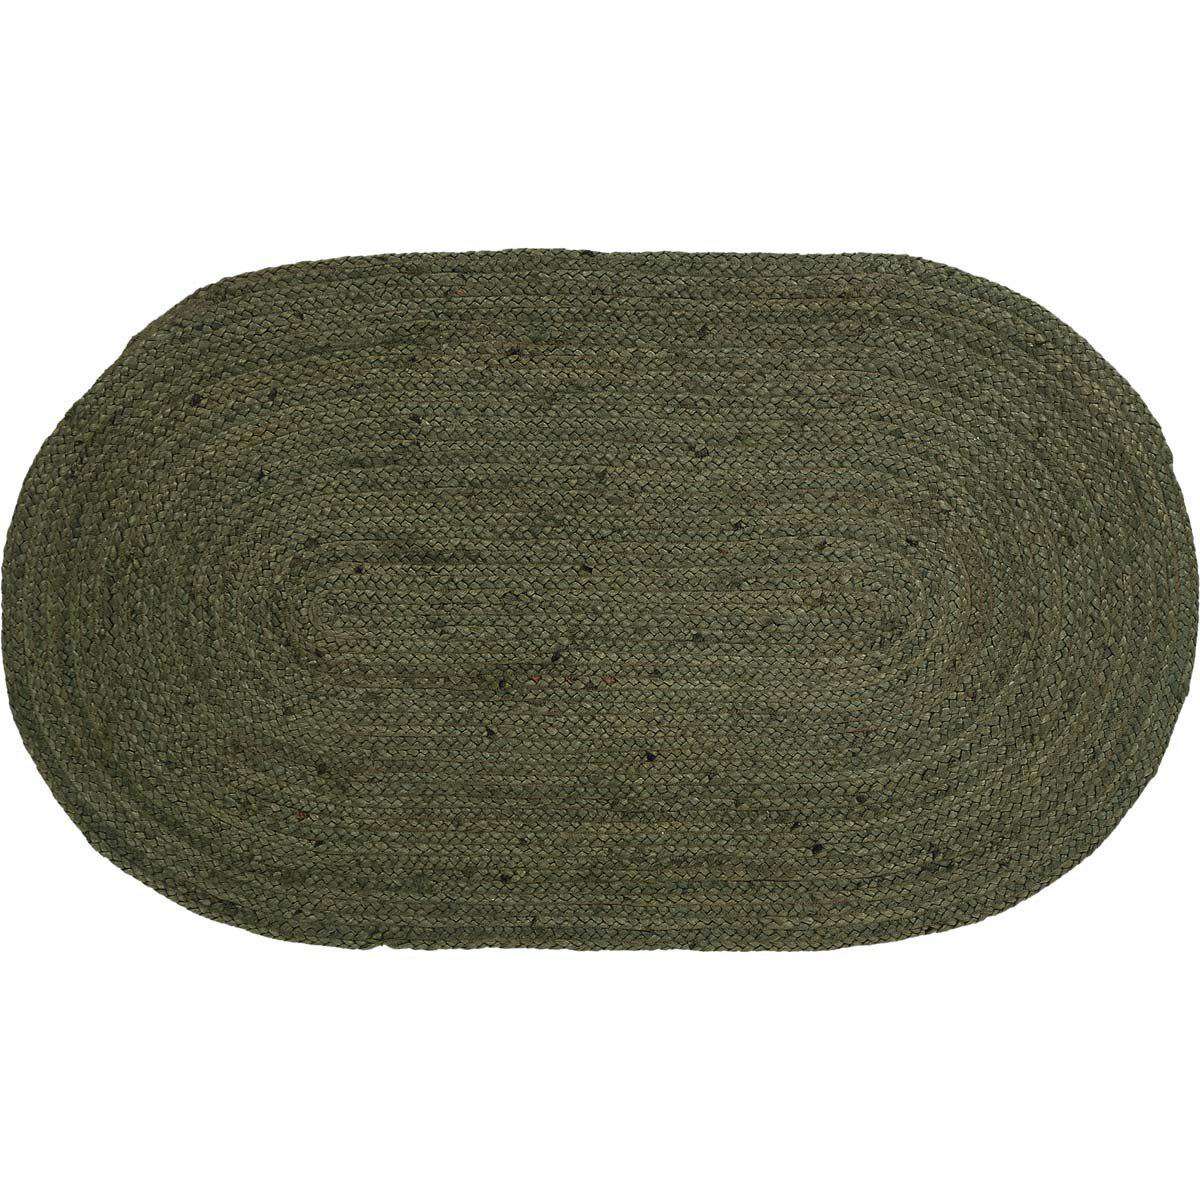 Cypress Jute Braided Oval Rugs VHC Brands Rugs VHC Brands 20" x 30" 